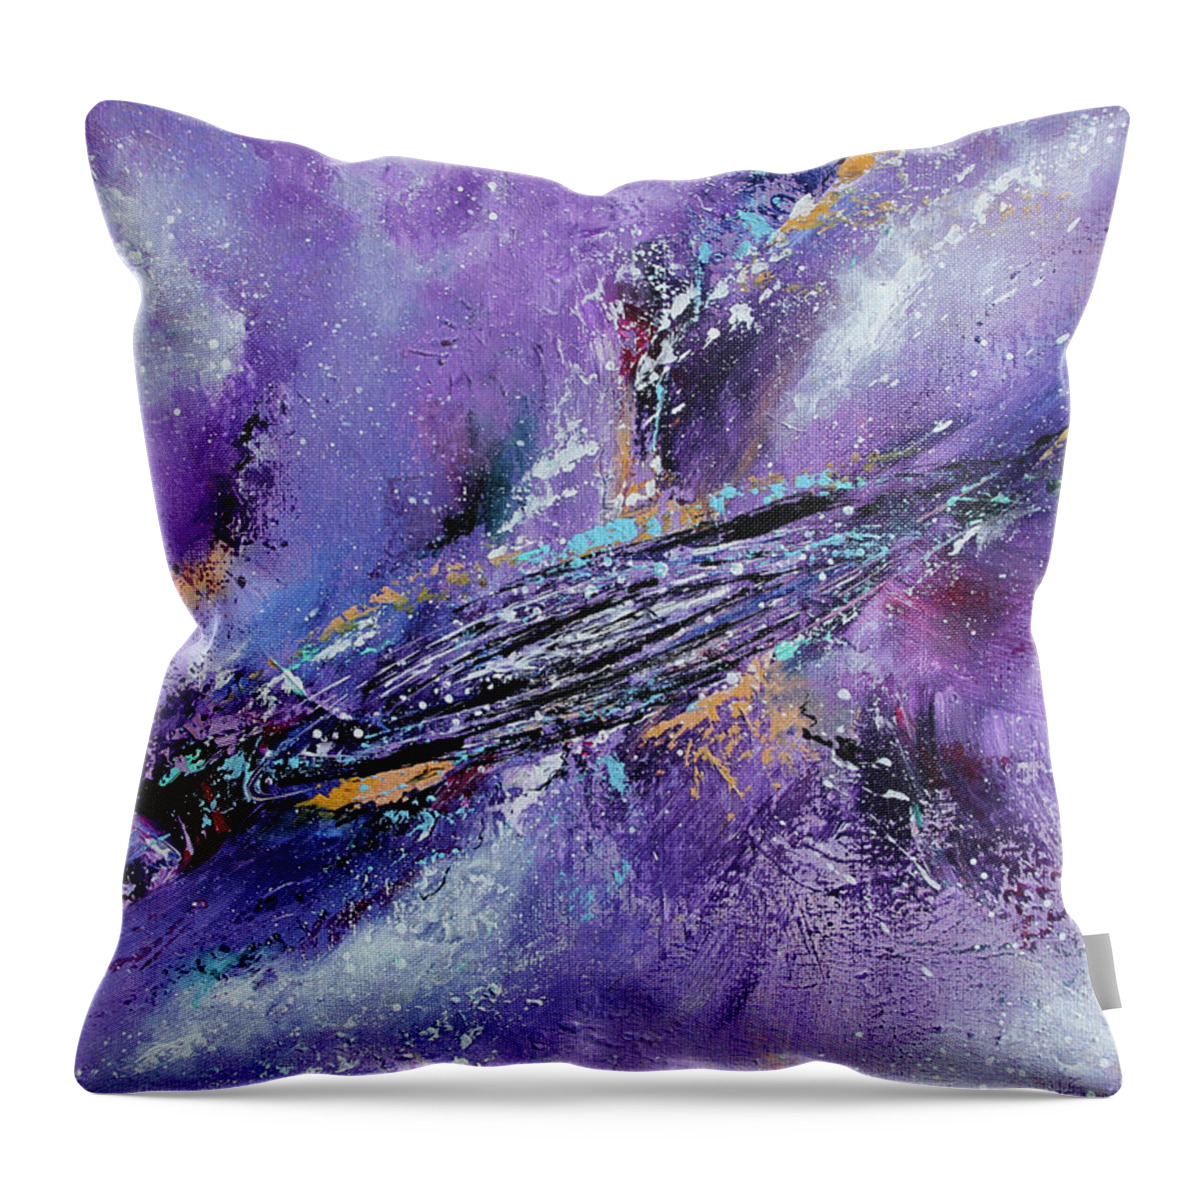 Acrylic Throw Pillow featuring the painting The Space by Themayart